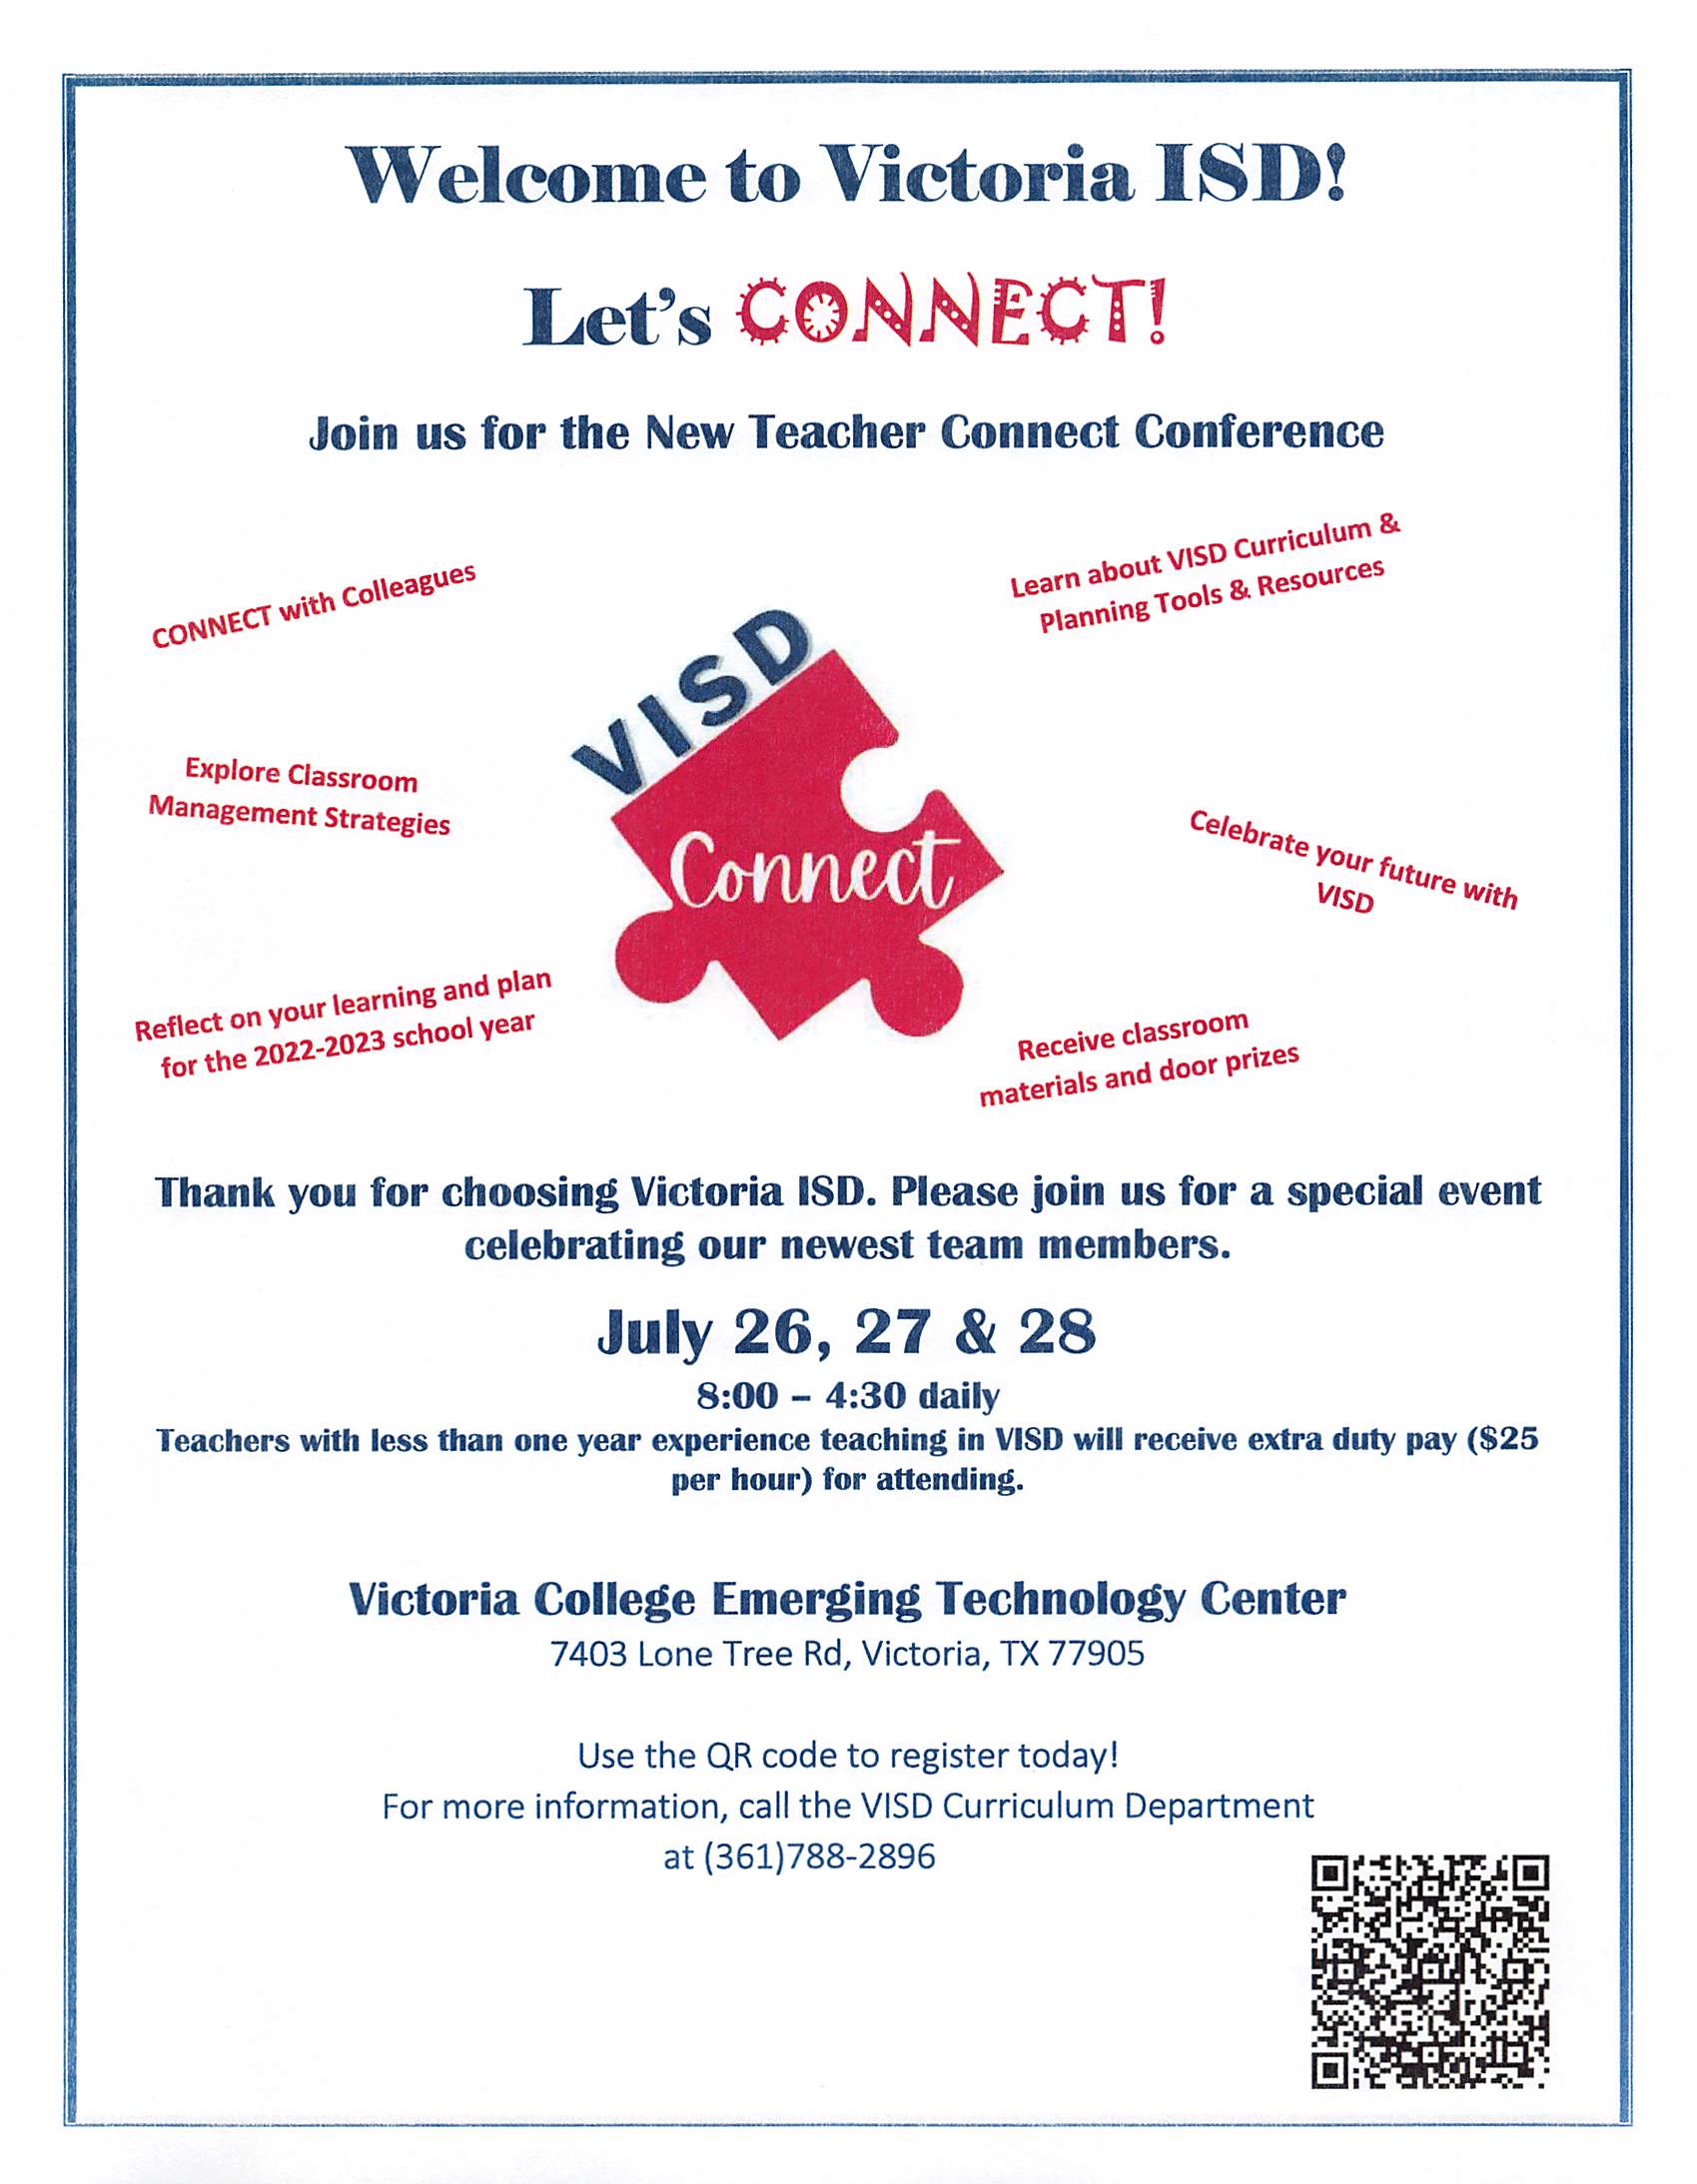 New Teacher Connect Conference Flyer Victoria ISD